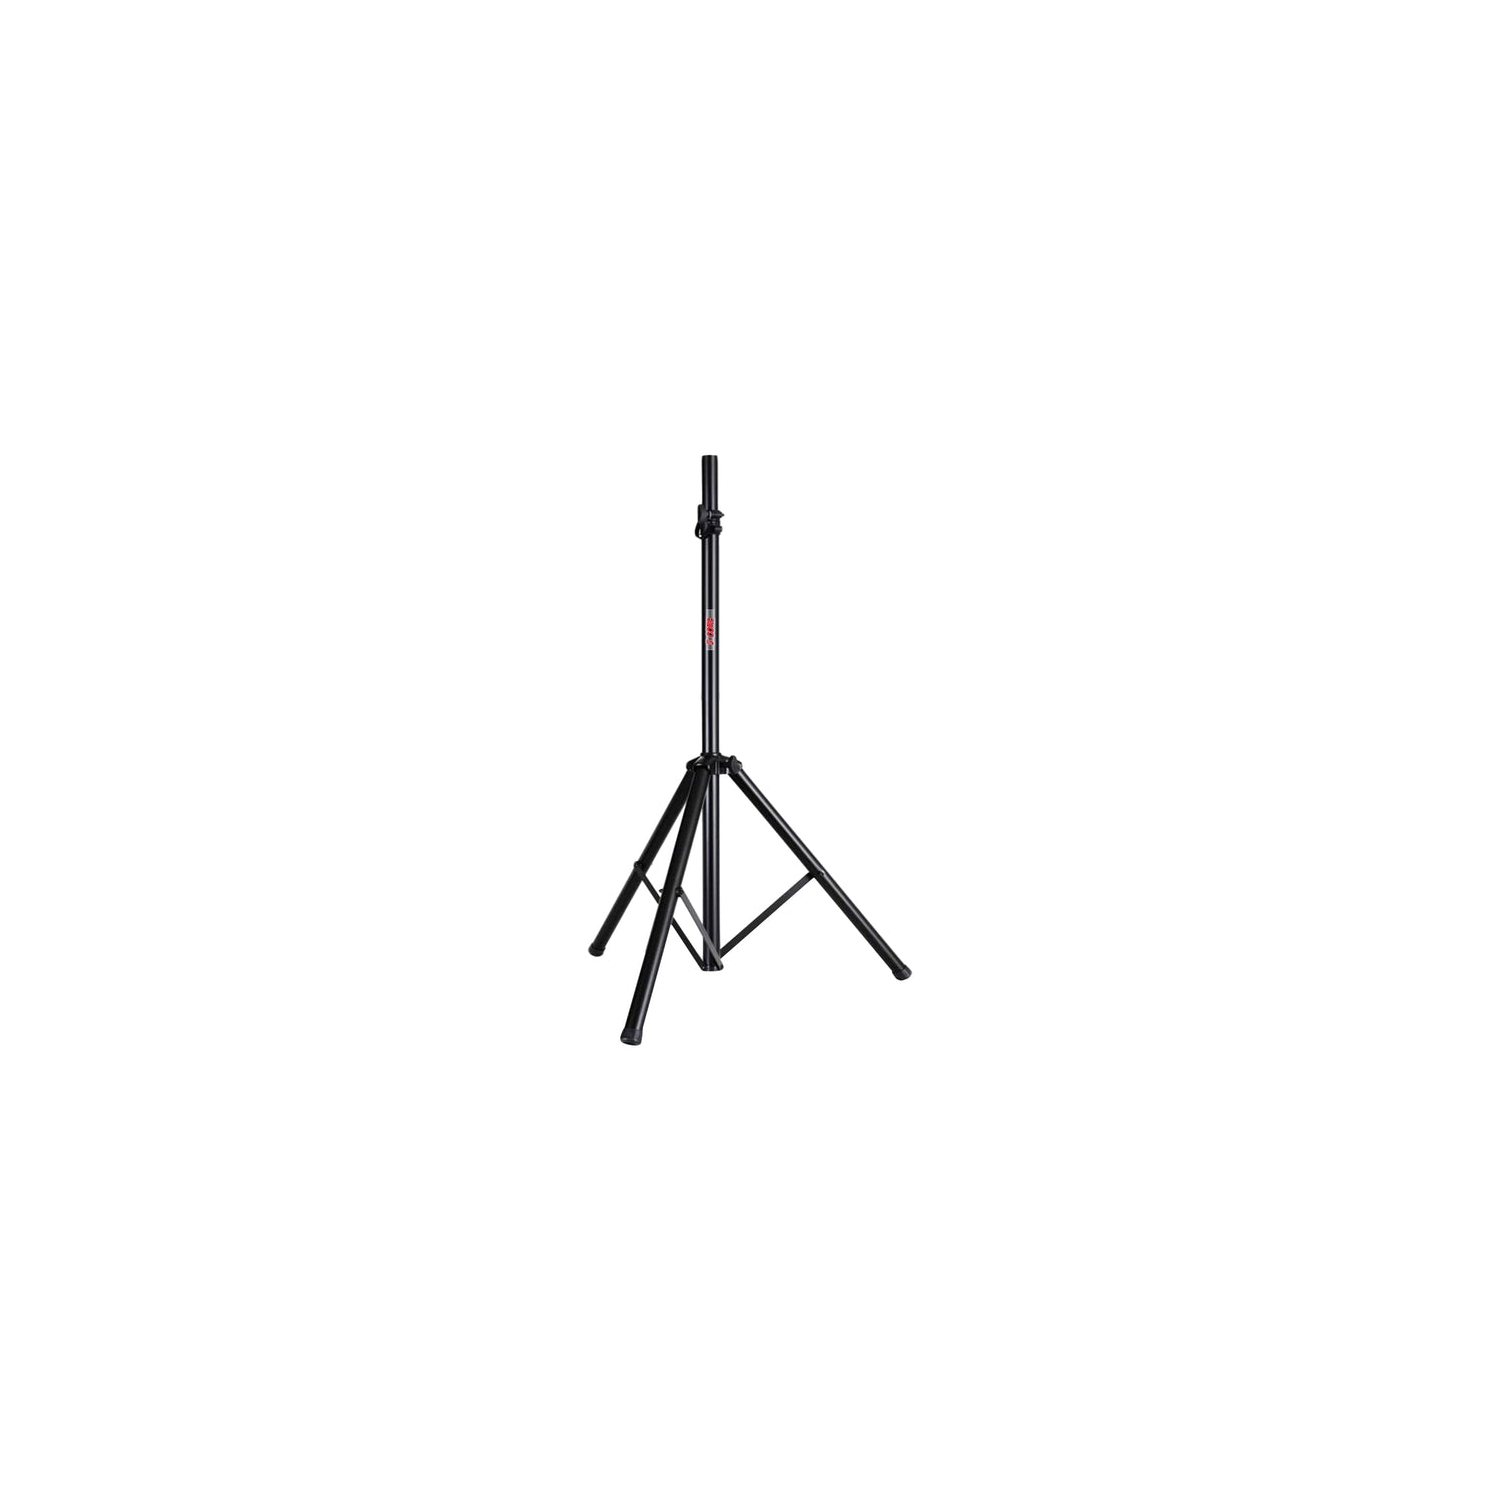 5 Core Speakers Stands 1 Piece Black Heavy Duty Height Adjustable Tripod PA Monitor Holder for Large Speakers DJ Stand Para Bocinas - SS HD 1PK BLK WOB